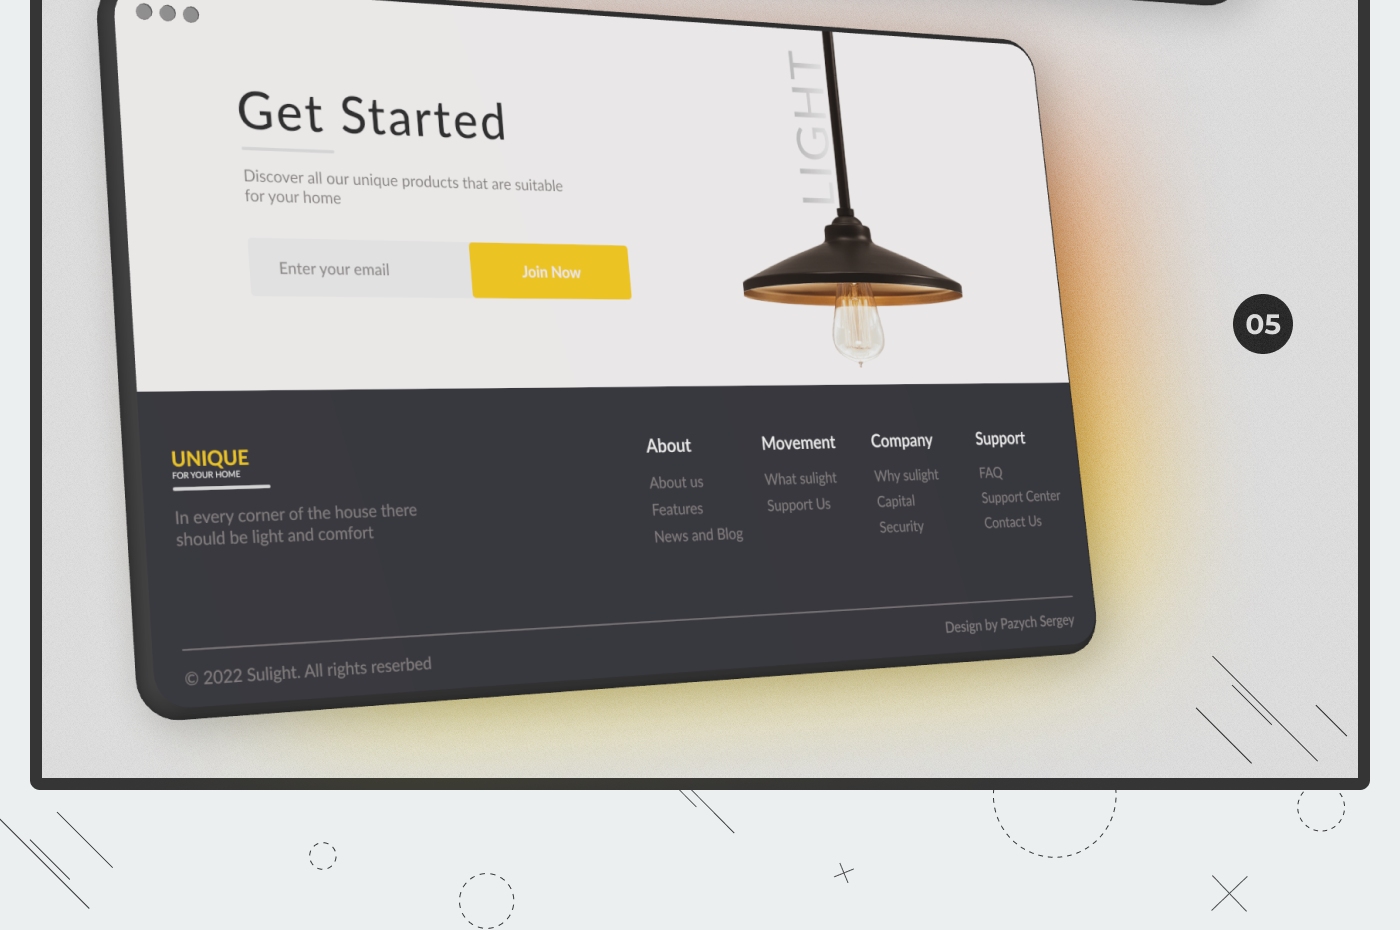 Promo website UI UX design for the sale of lamps and lighting devices